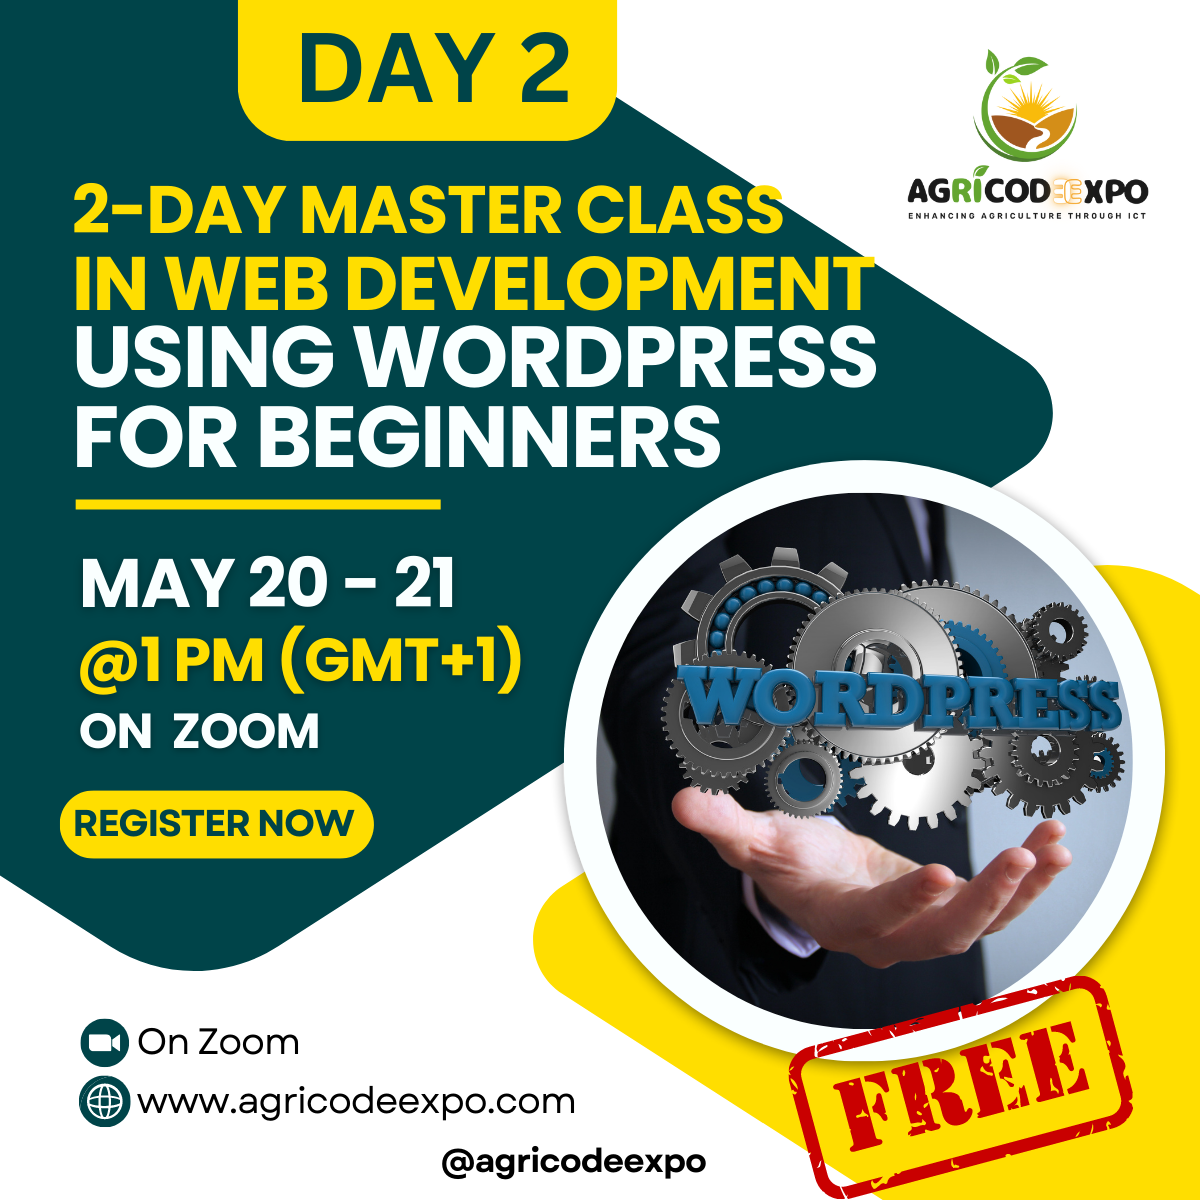 DAY 2: 2 day master class on web development with WordPress for beginners.